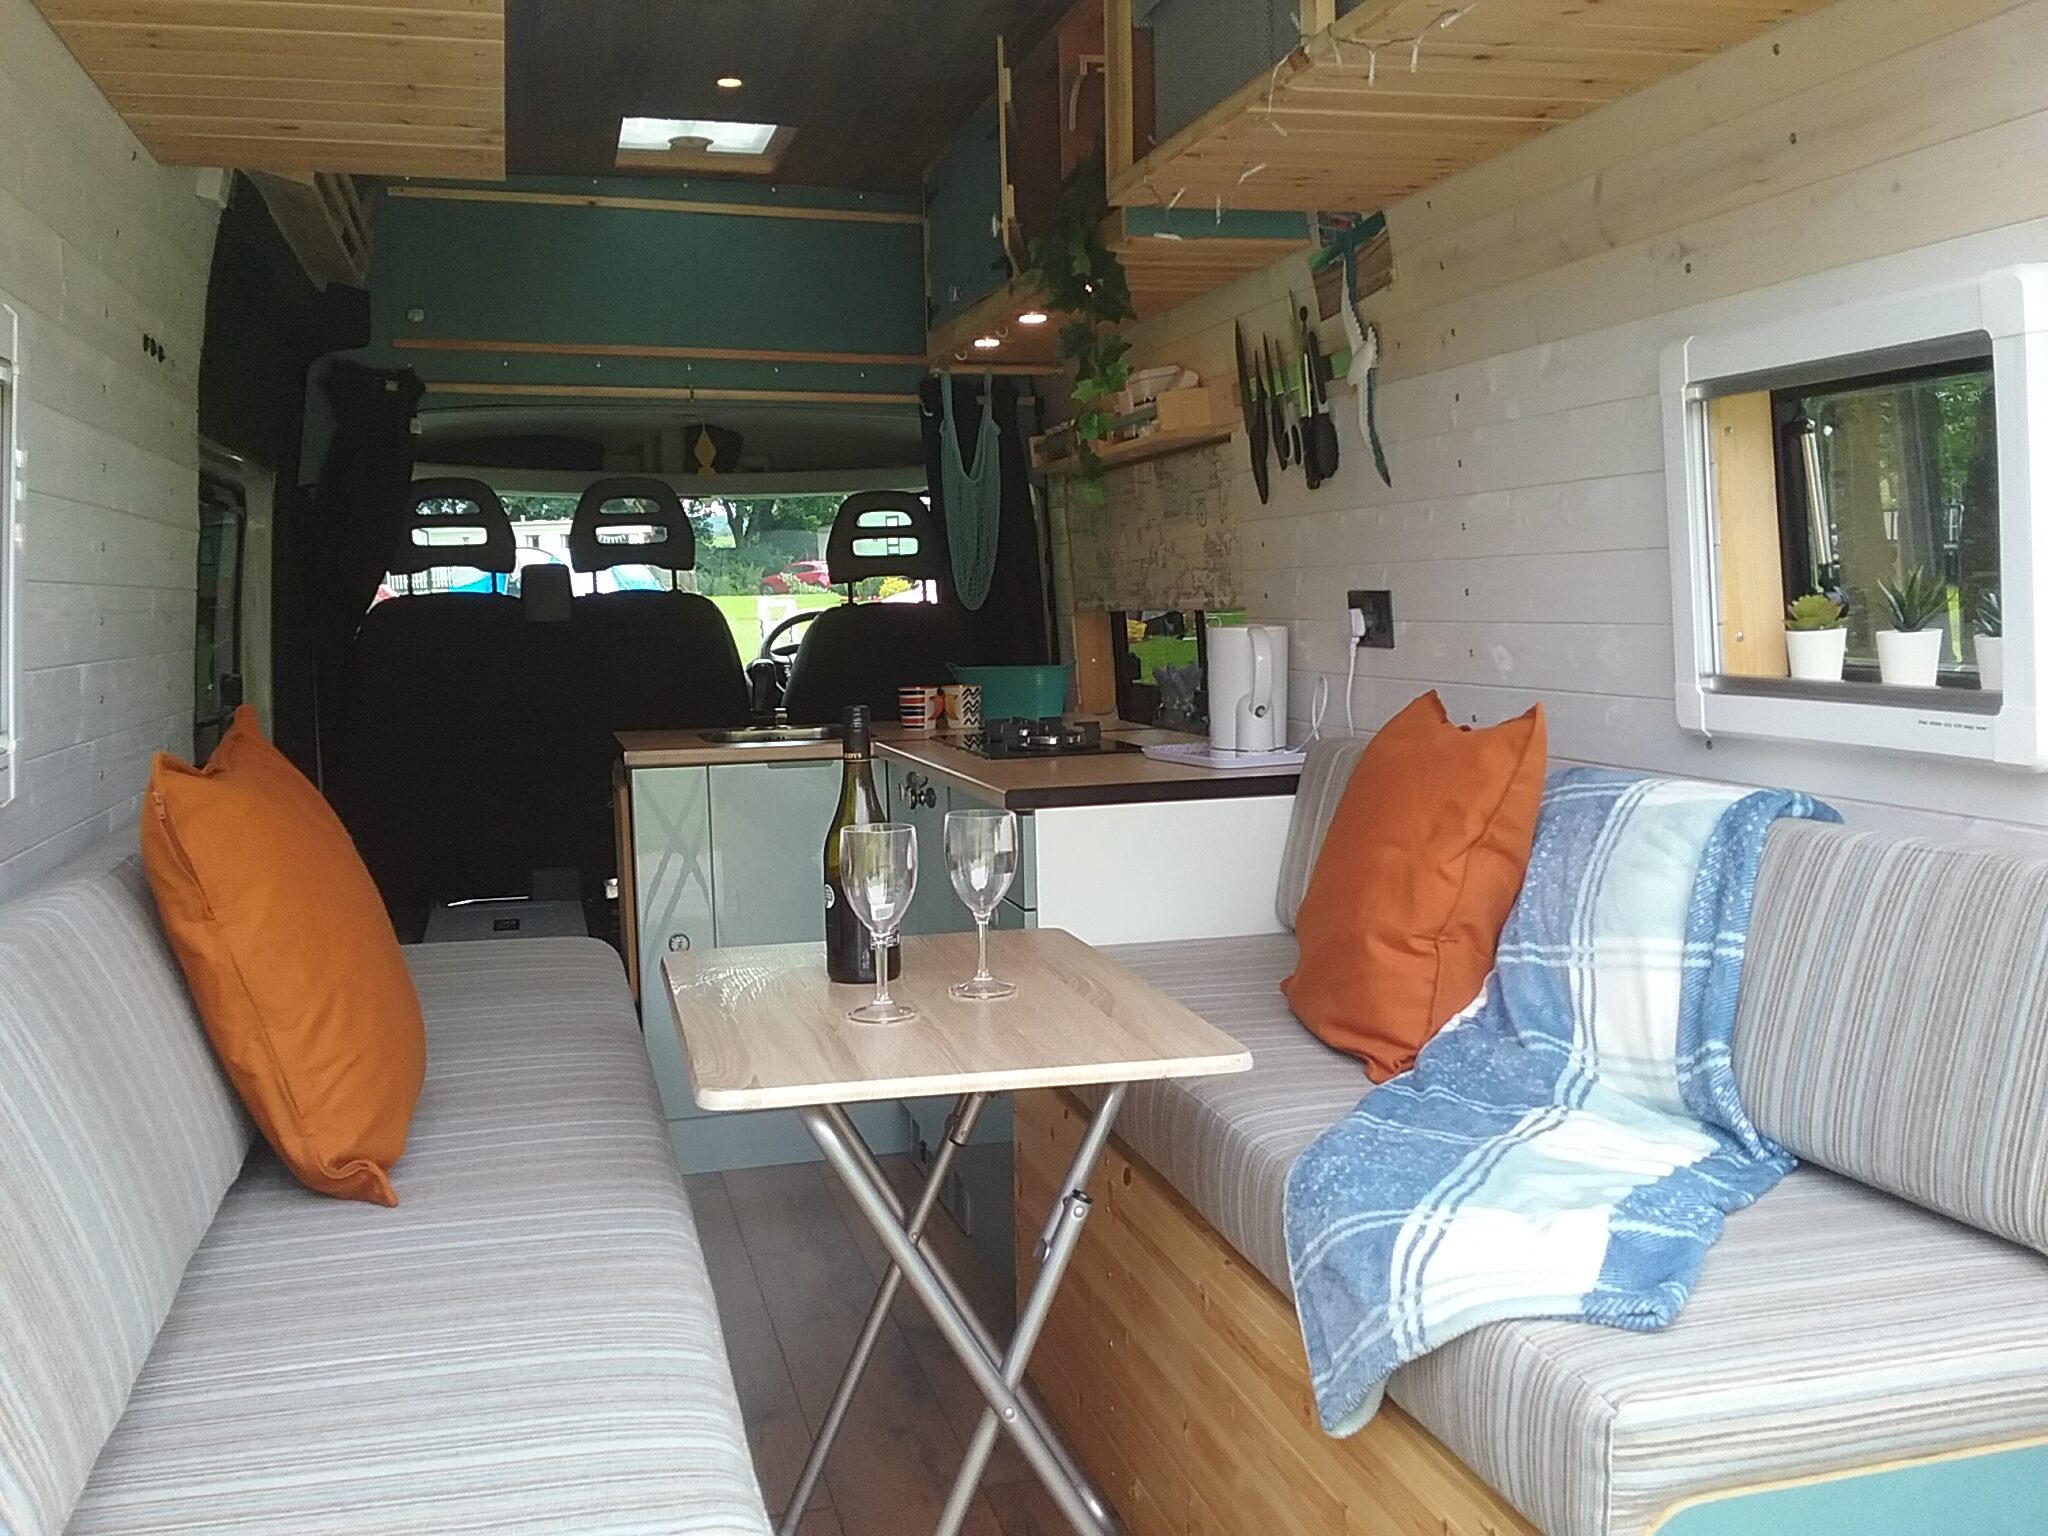 Interior of a cozy converted camper van featuring a seating area with striped cushions, orange pillows, and a blue-checked blanket. A foldable table holds two glasses and a wine bottle. The kitchen has hanging utensils and storage cabinets. A window with potted plants offers natural light.